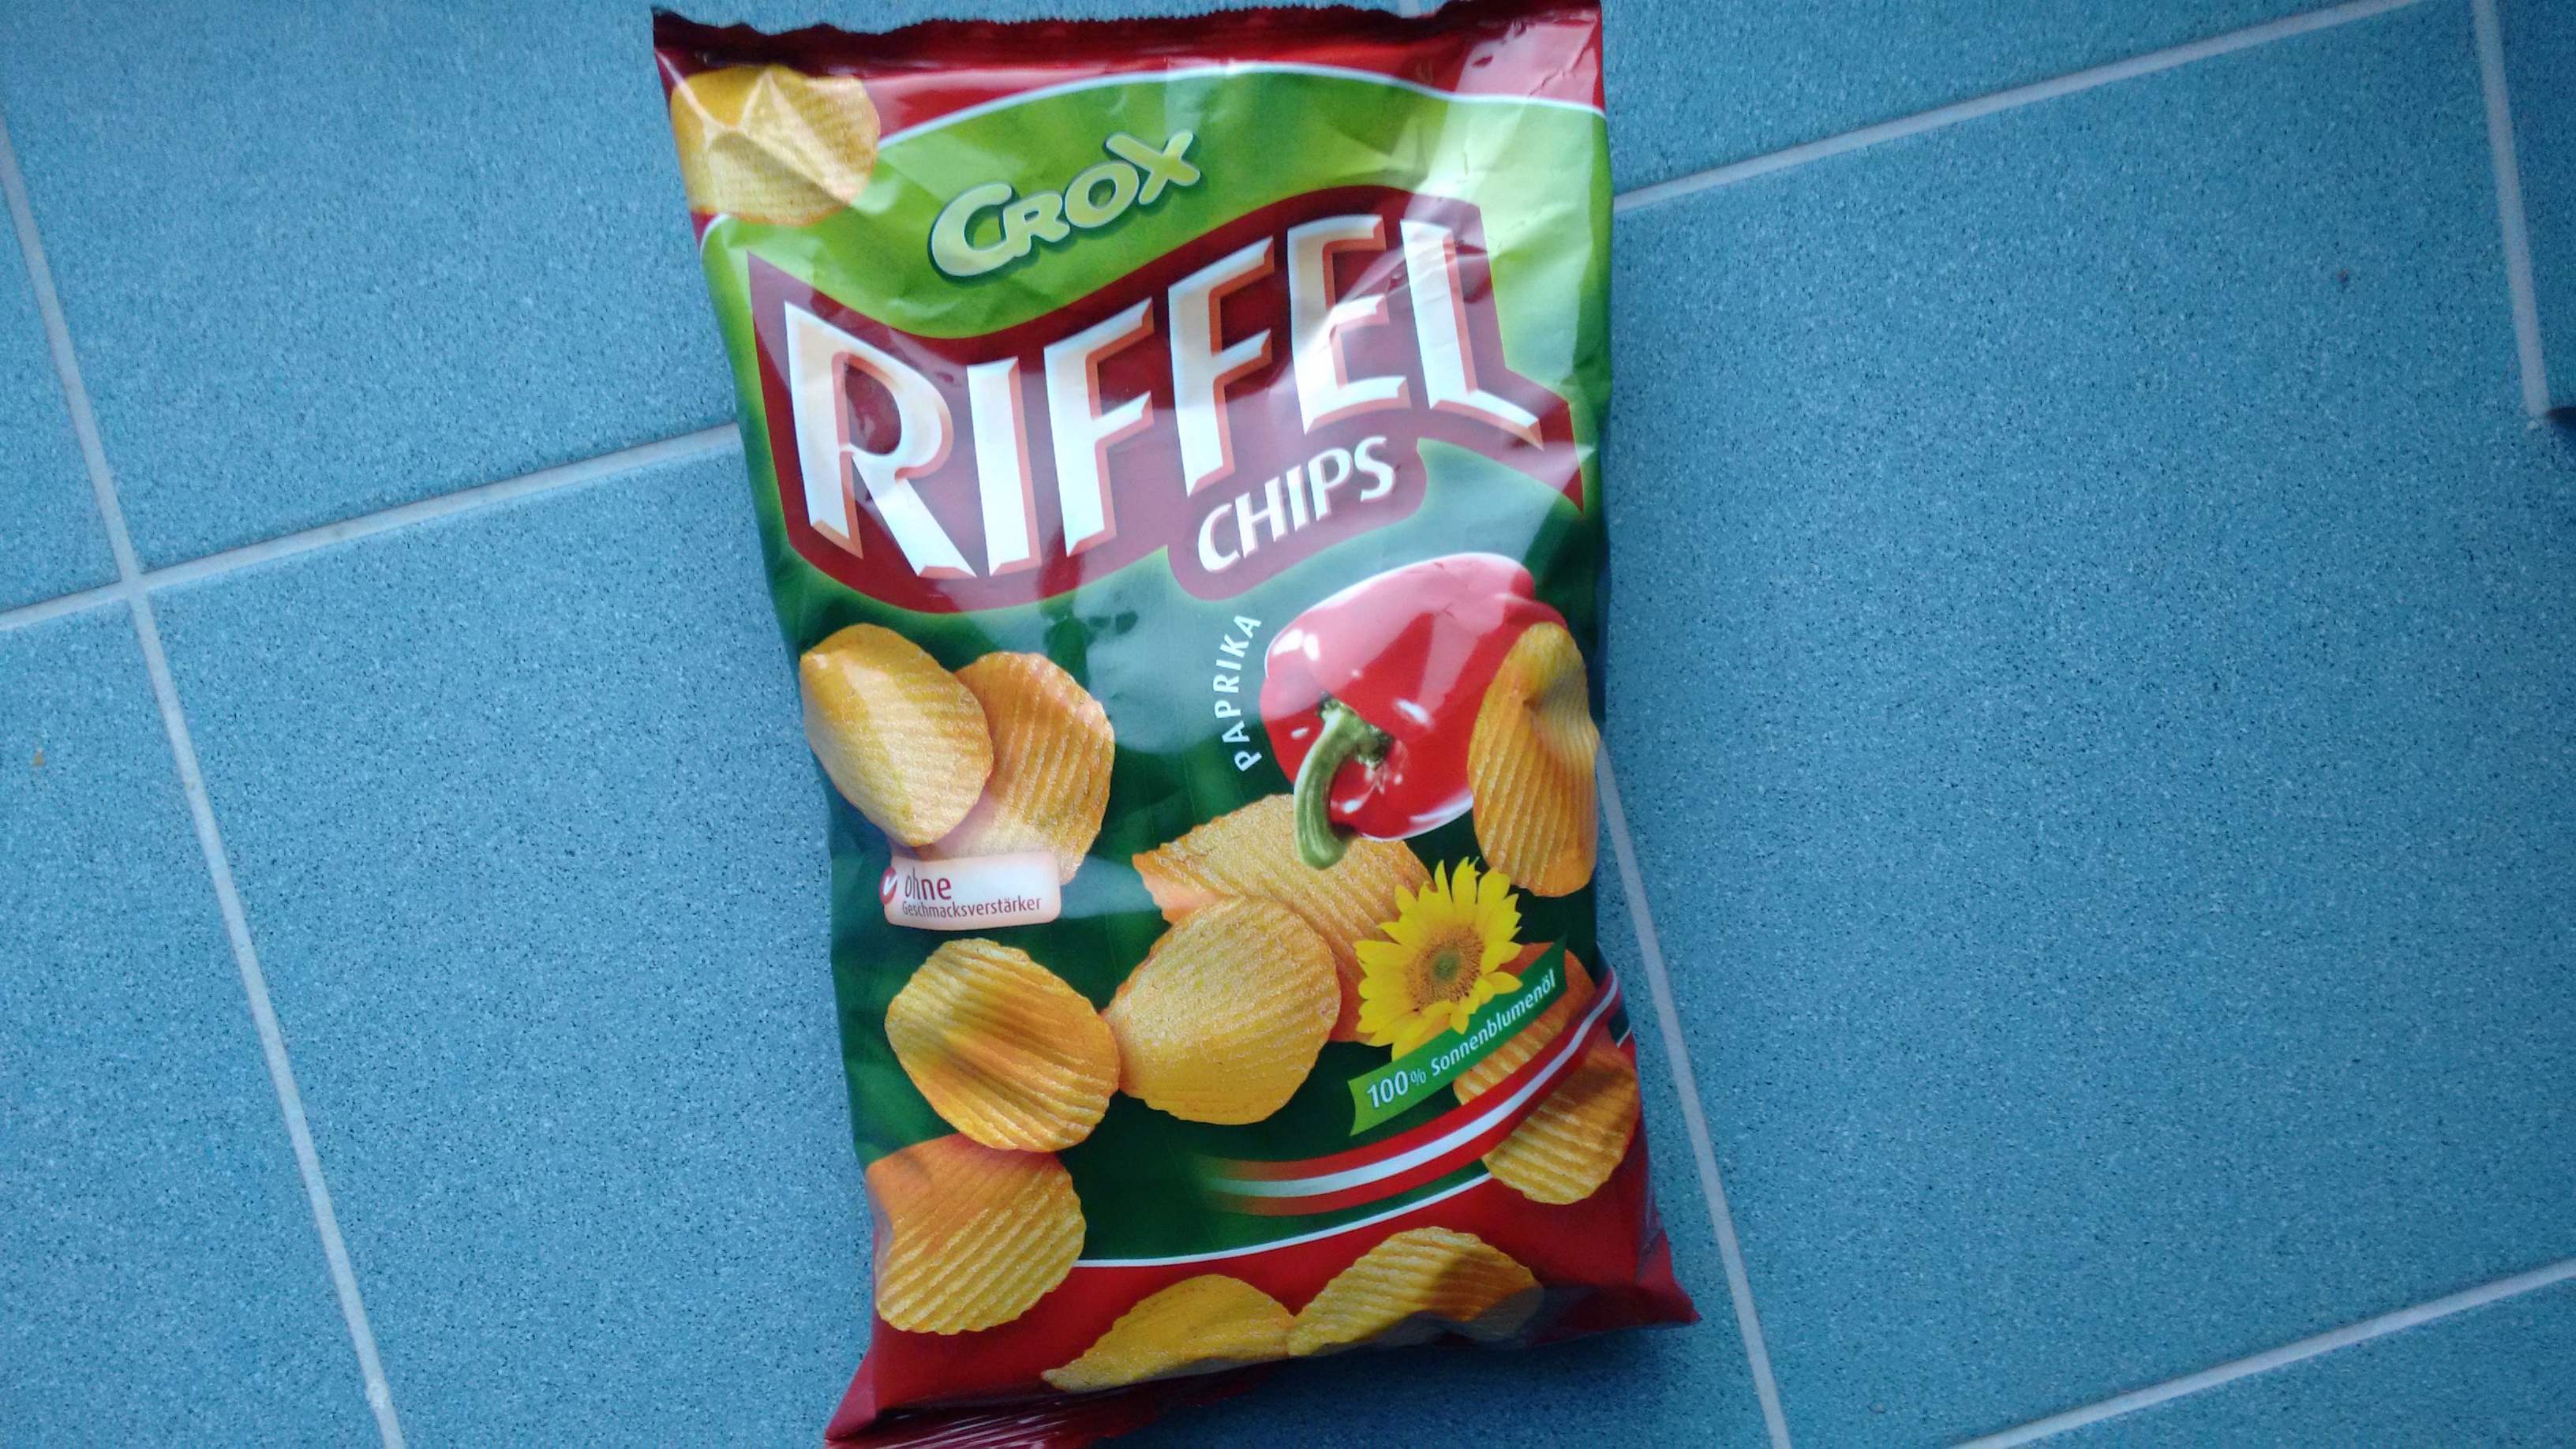 clipsy chips mean